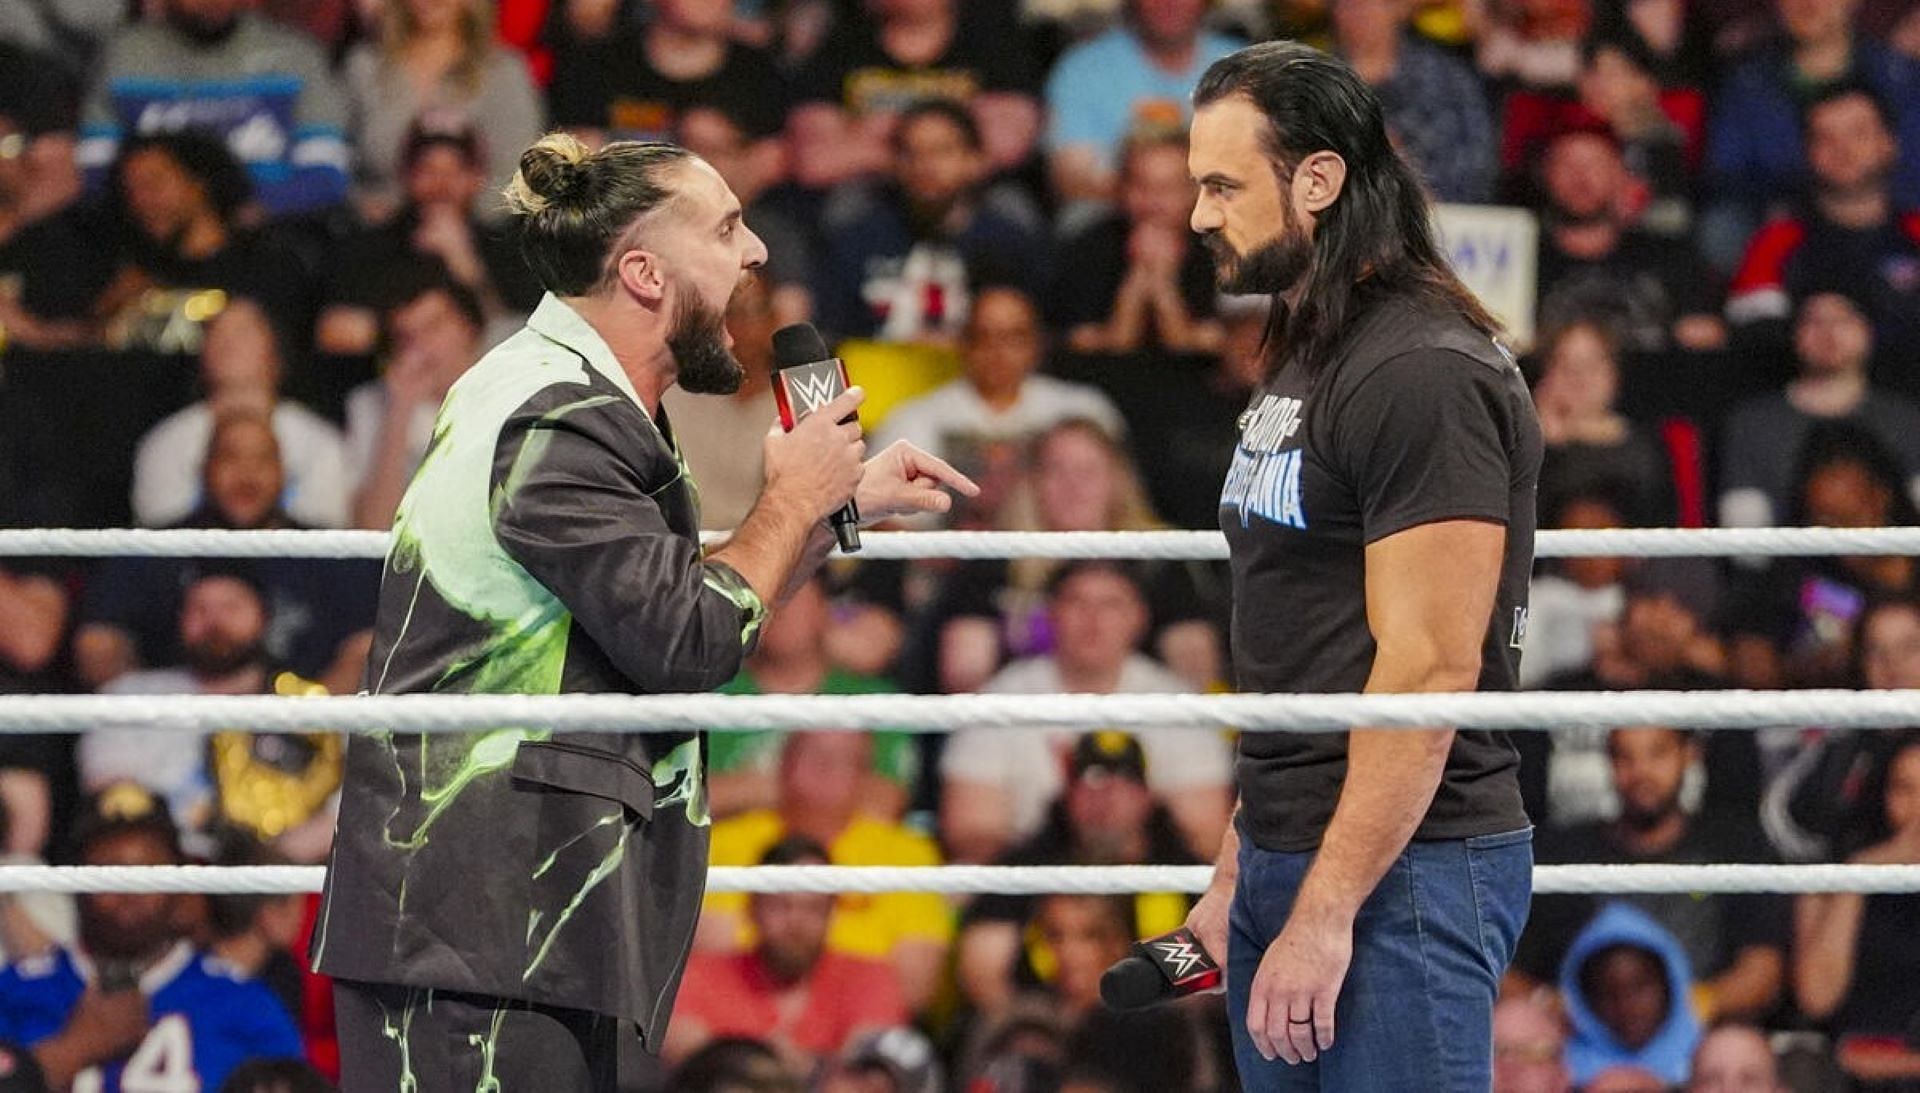 Things are heating up between Seth Rollins and Drew McIntyre.